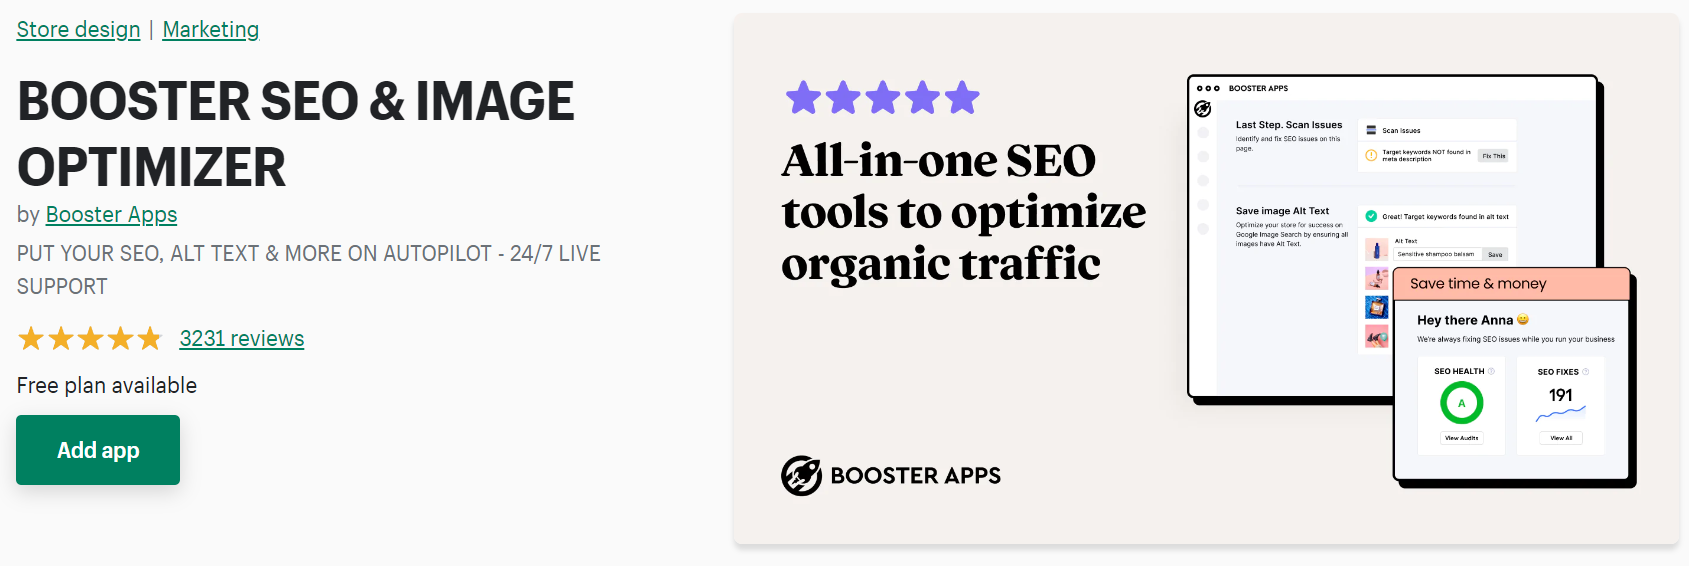 Booster SEO and image optimizer shopify app